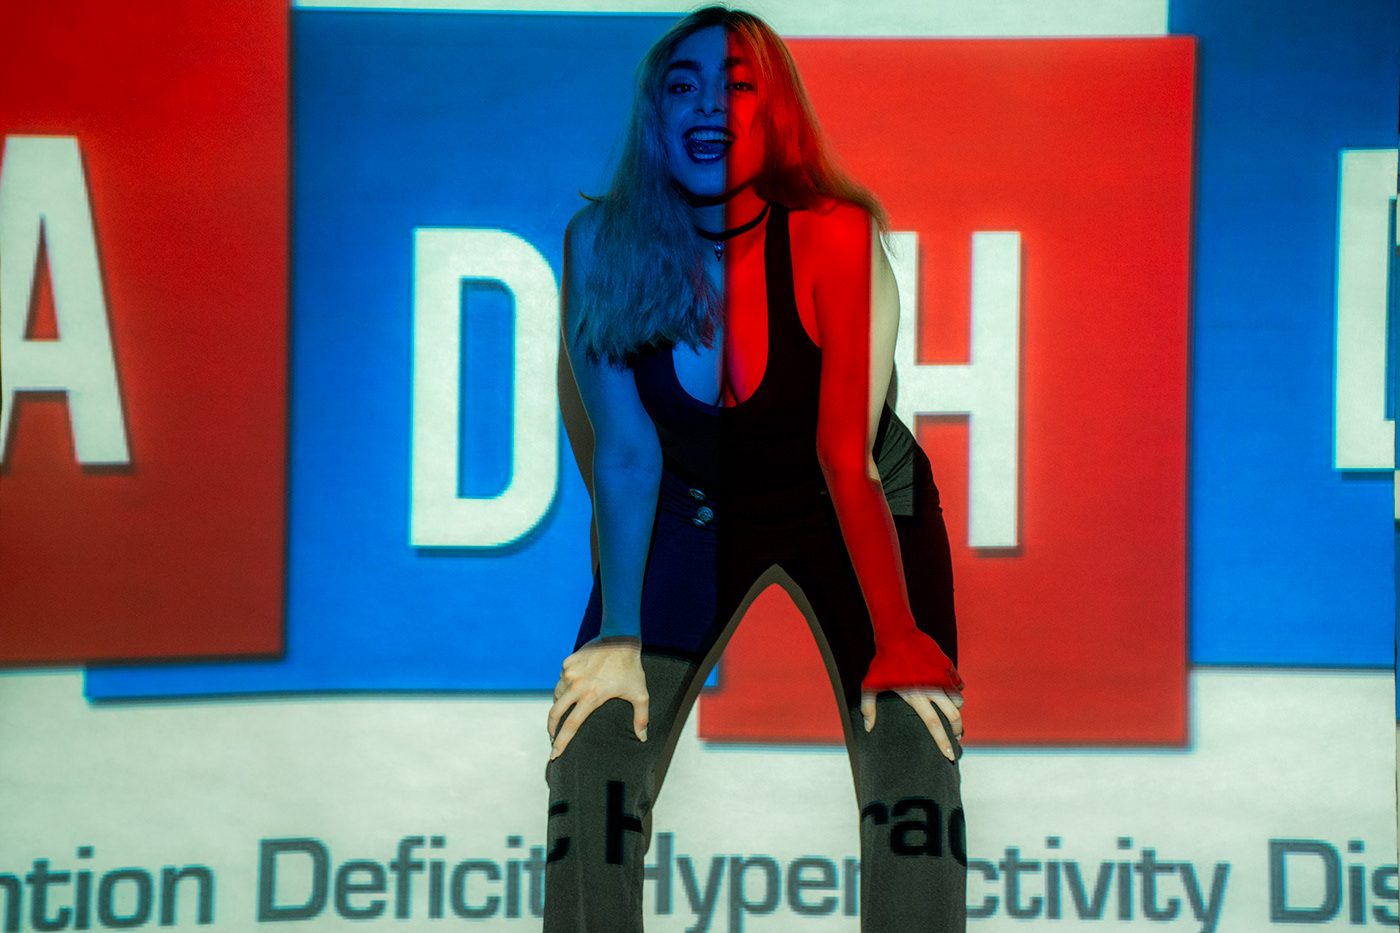 ADHD blue photoshoot Projector red